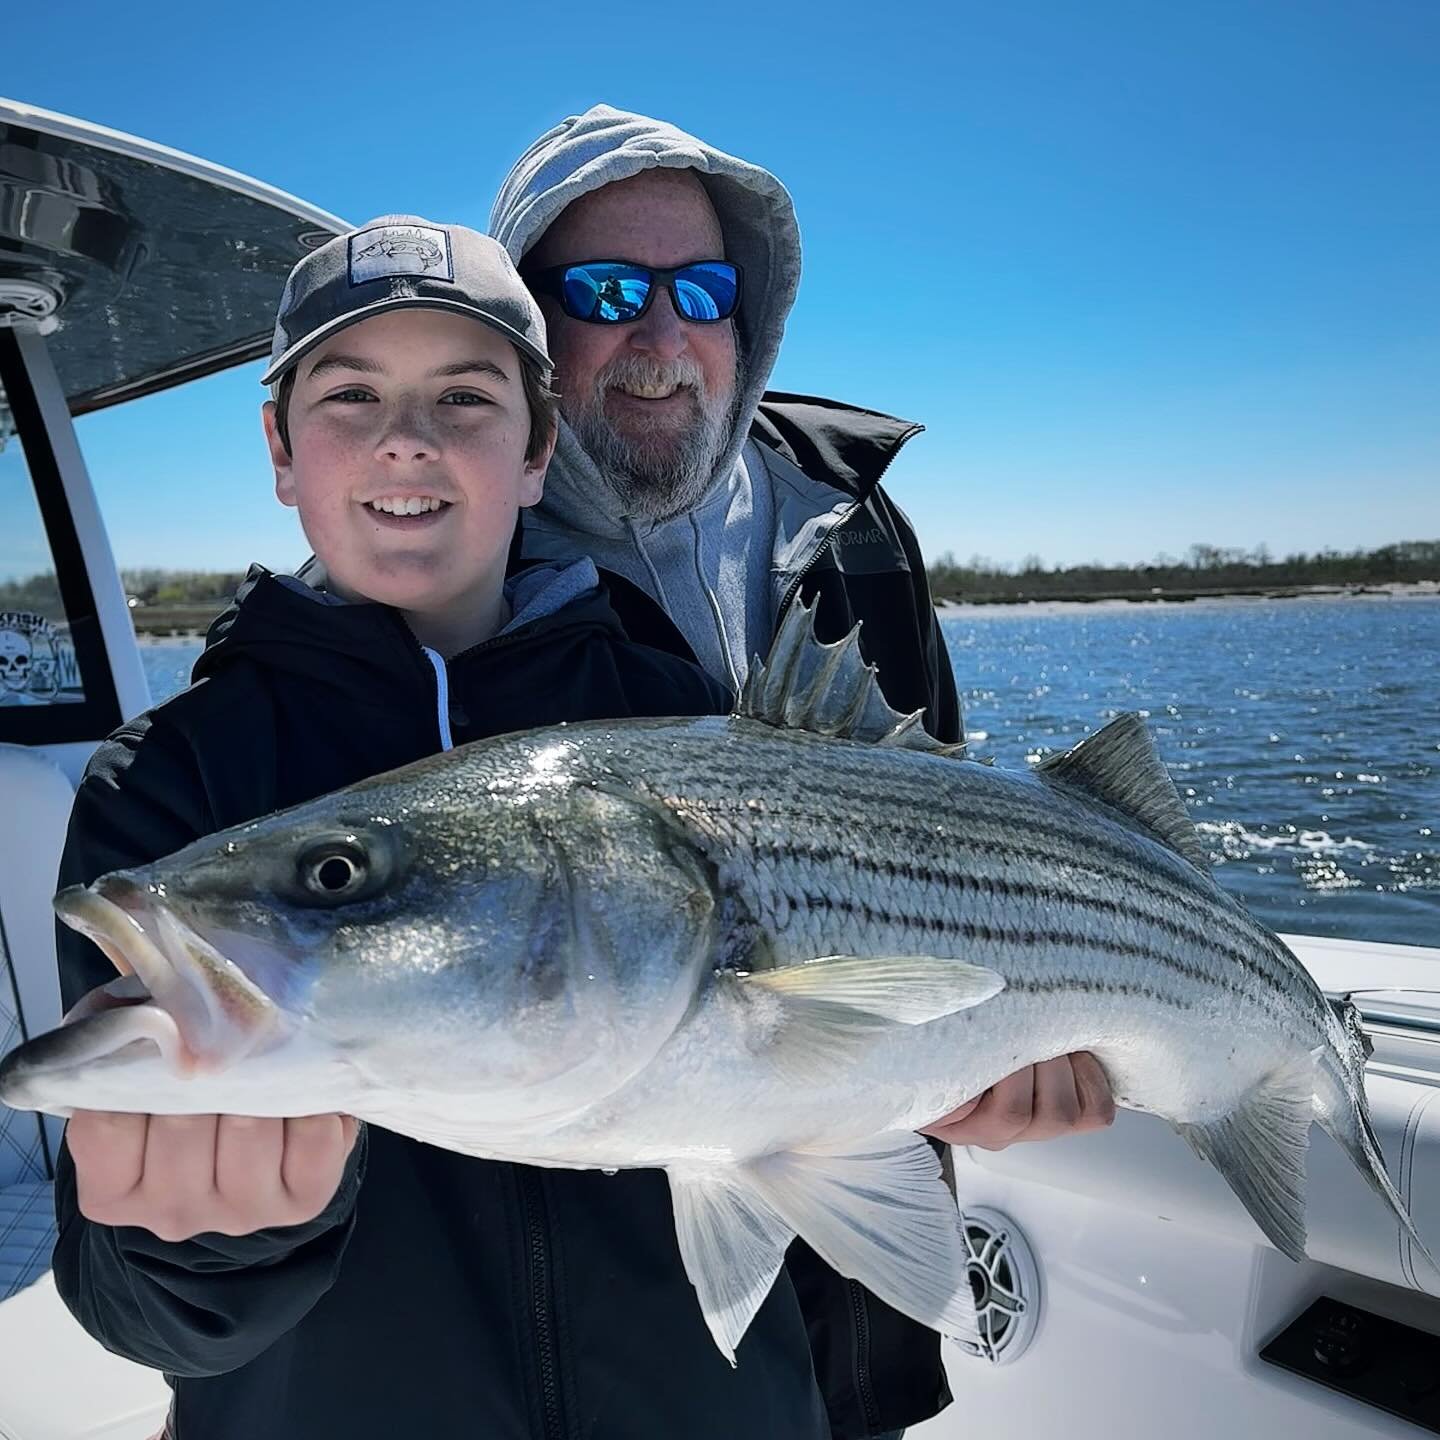 4/23/24: This afternoon we had @mnhtn2mtk, his son little Mike &amp; friends on a windy day bass charter. Conditions weren't easy with gusts to 30 but the guys fished hard to find fish that were chewing and everyone caught. We even saw an Osprey figh